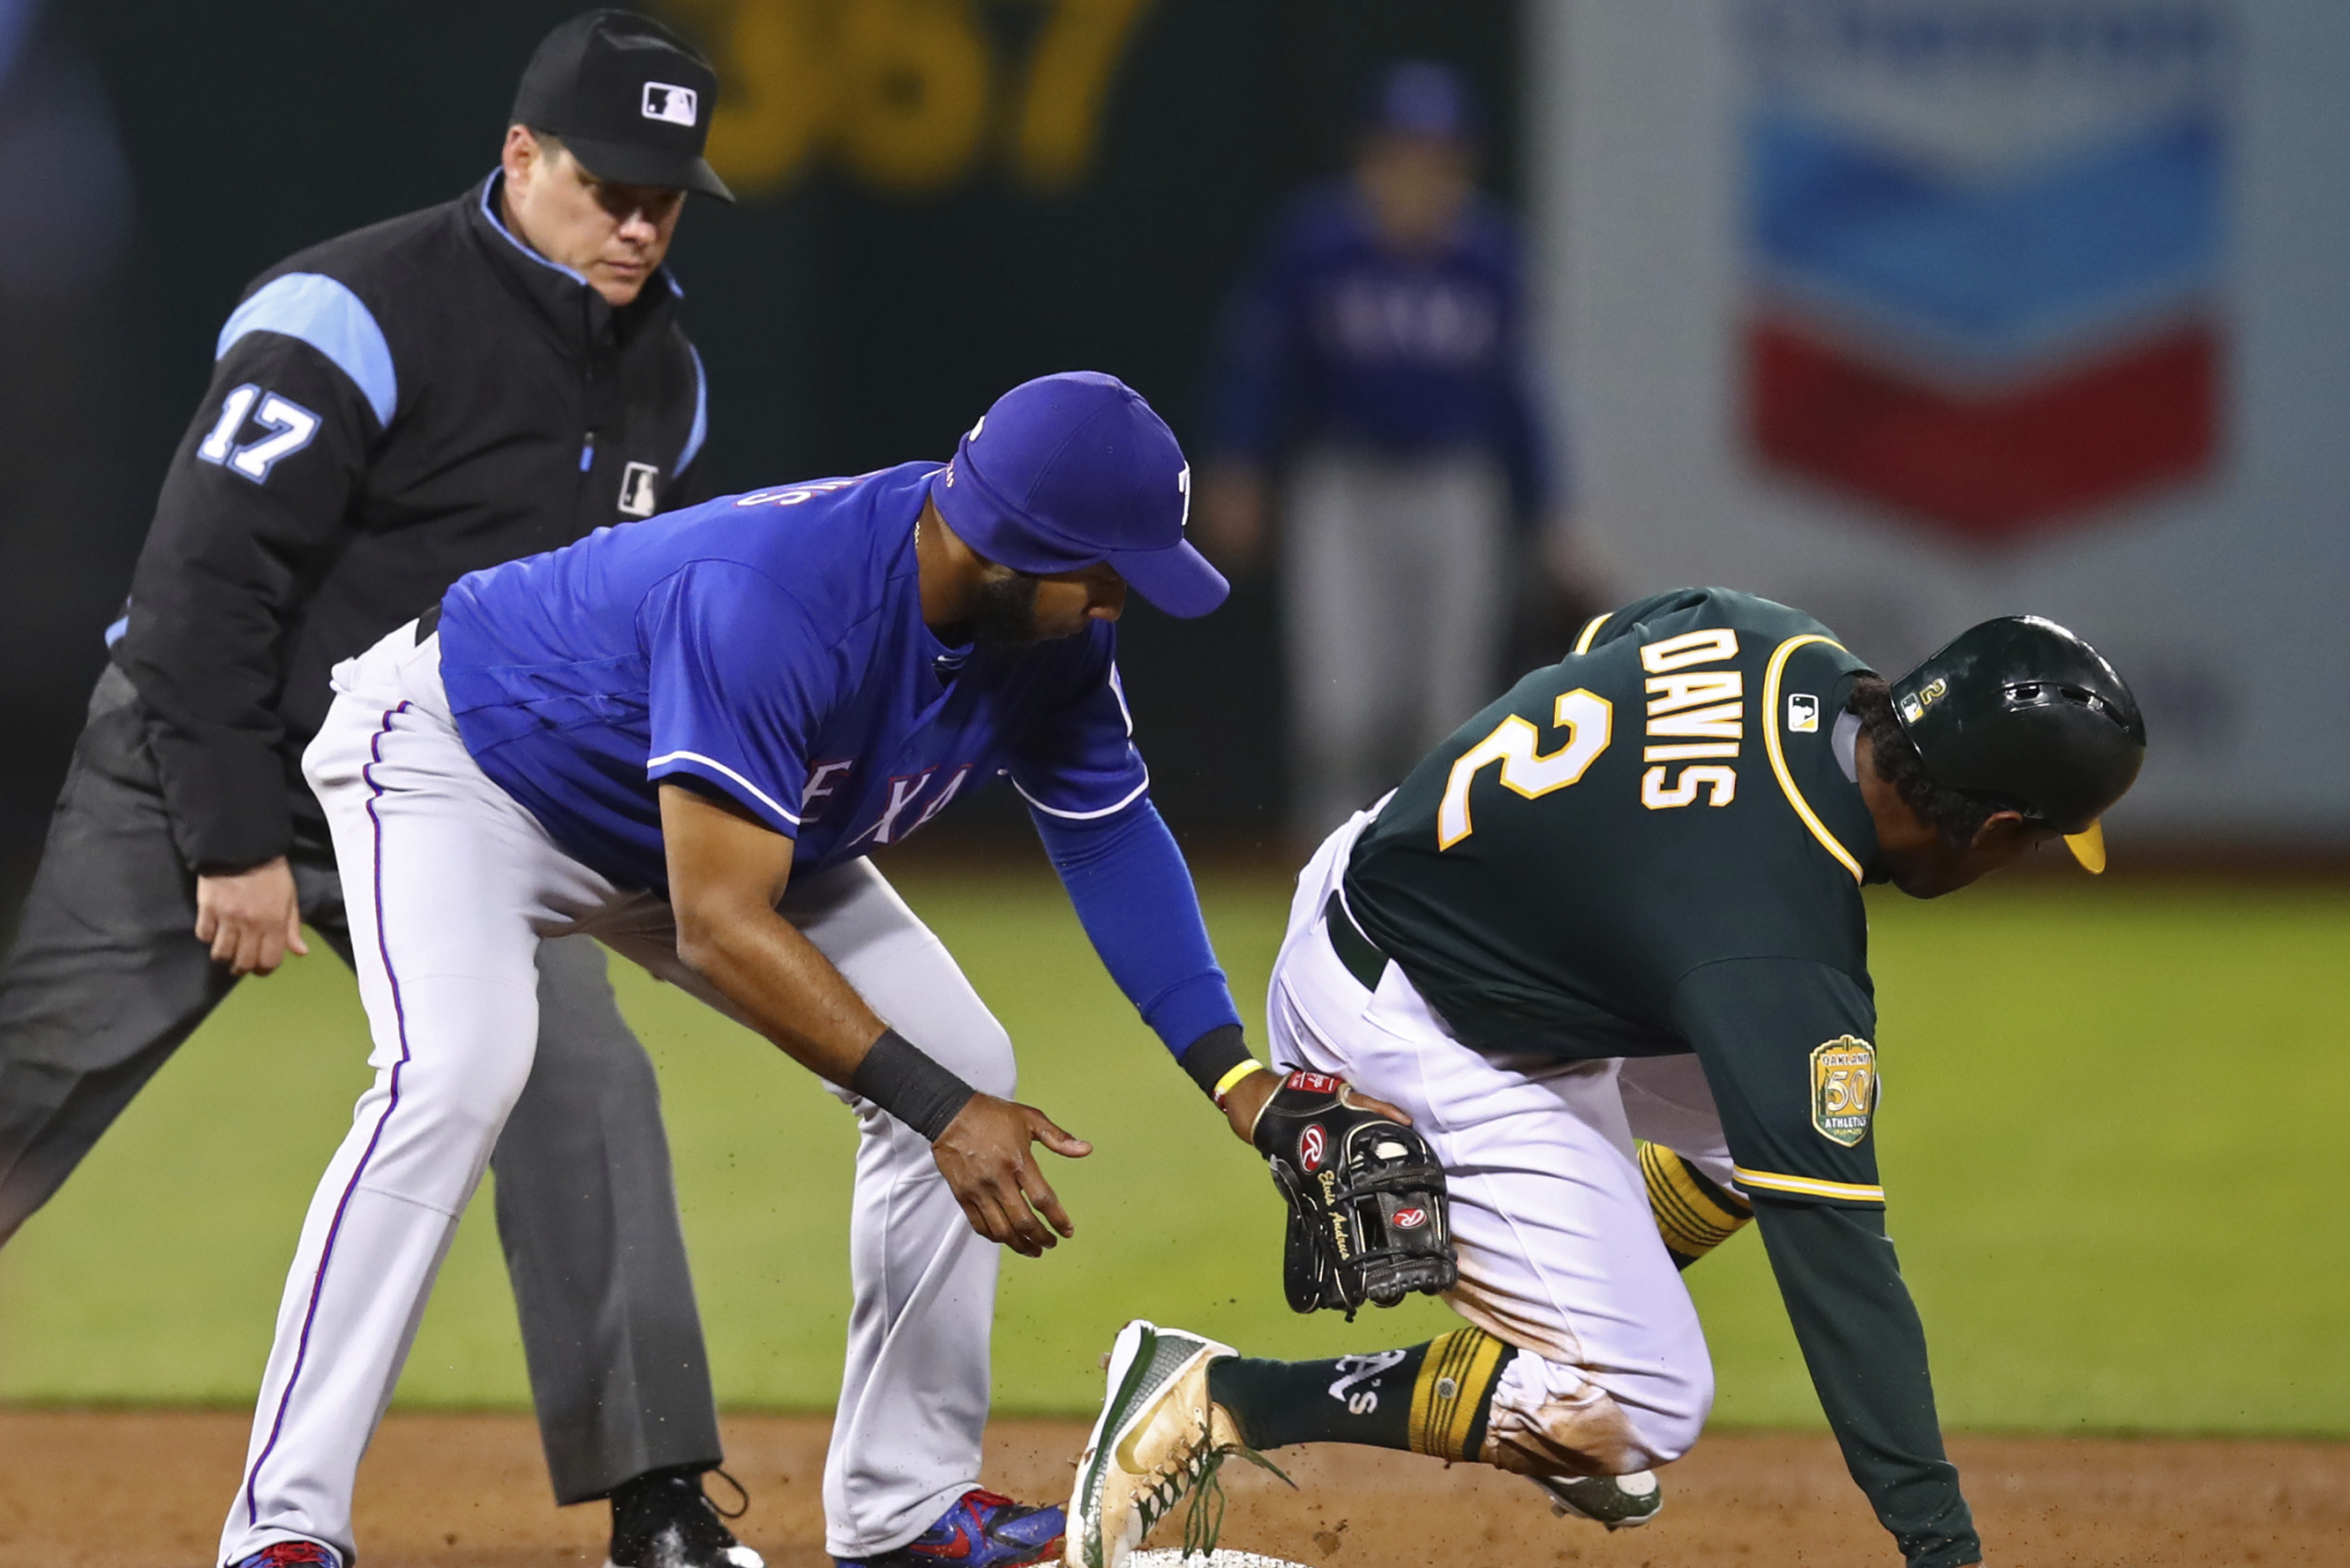 Elvis leaving Texas: Rangers deal Andrus to A's for DH Davis